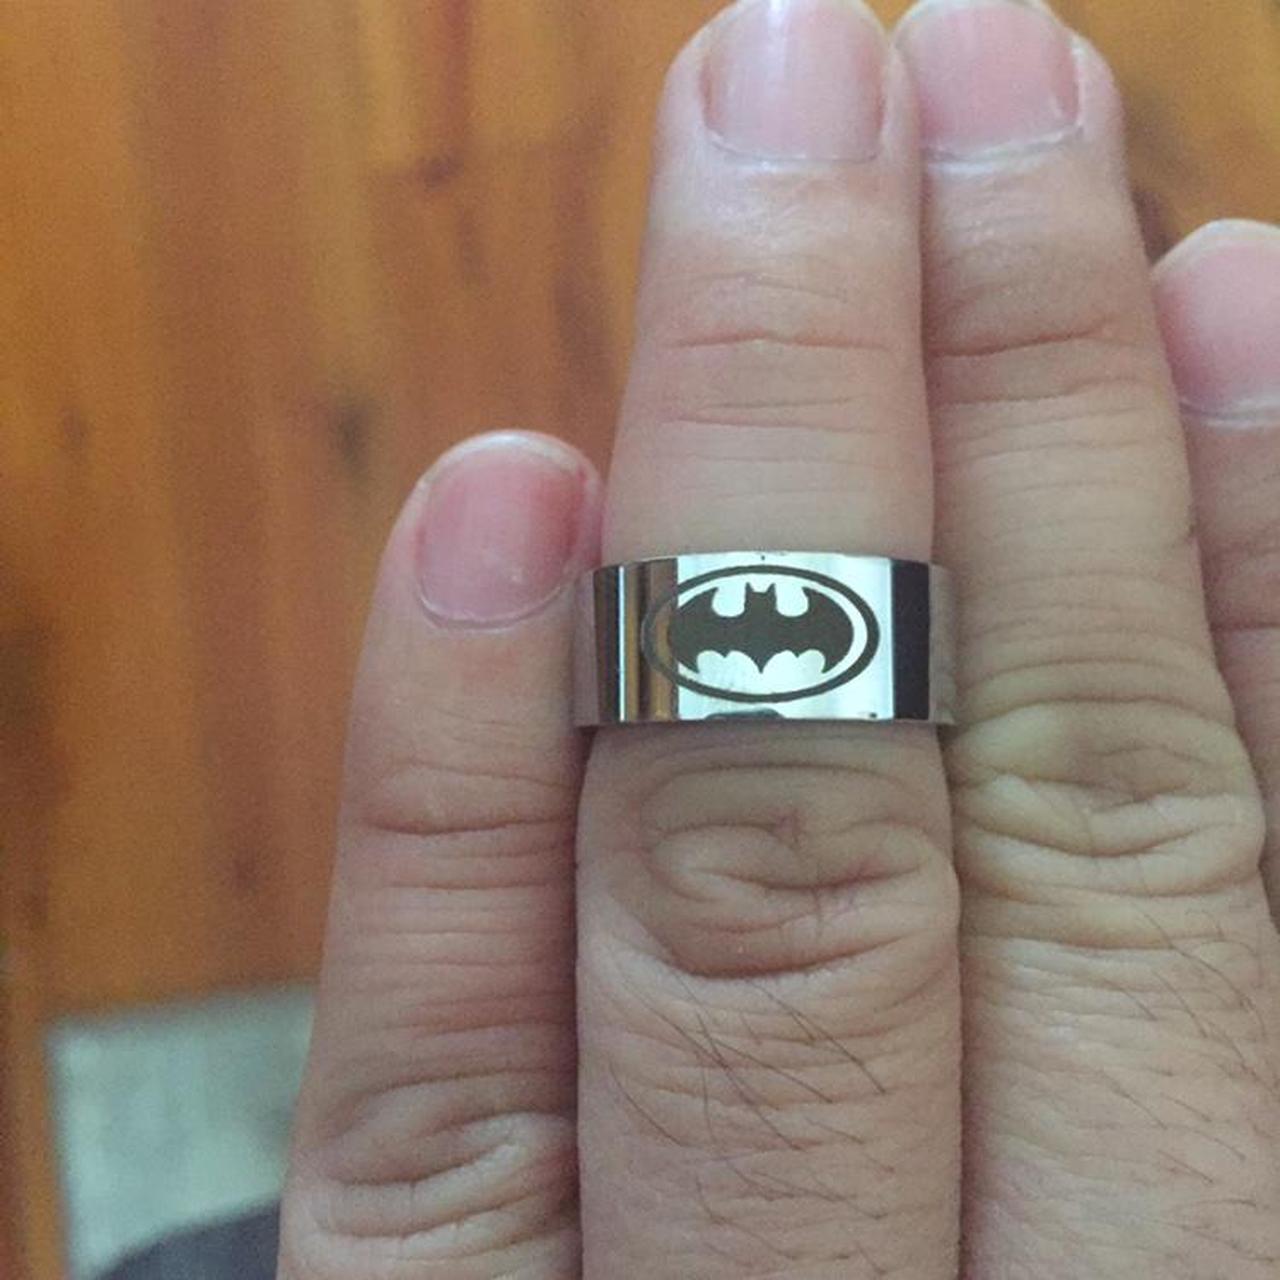 Product Image 4 - Stainless steel Batman ring size